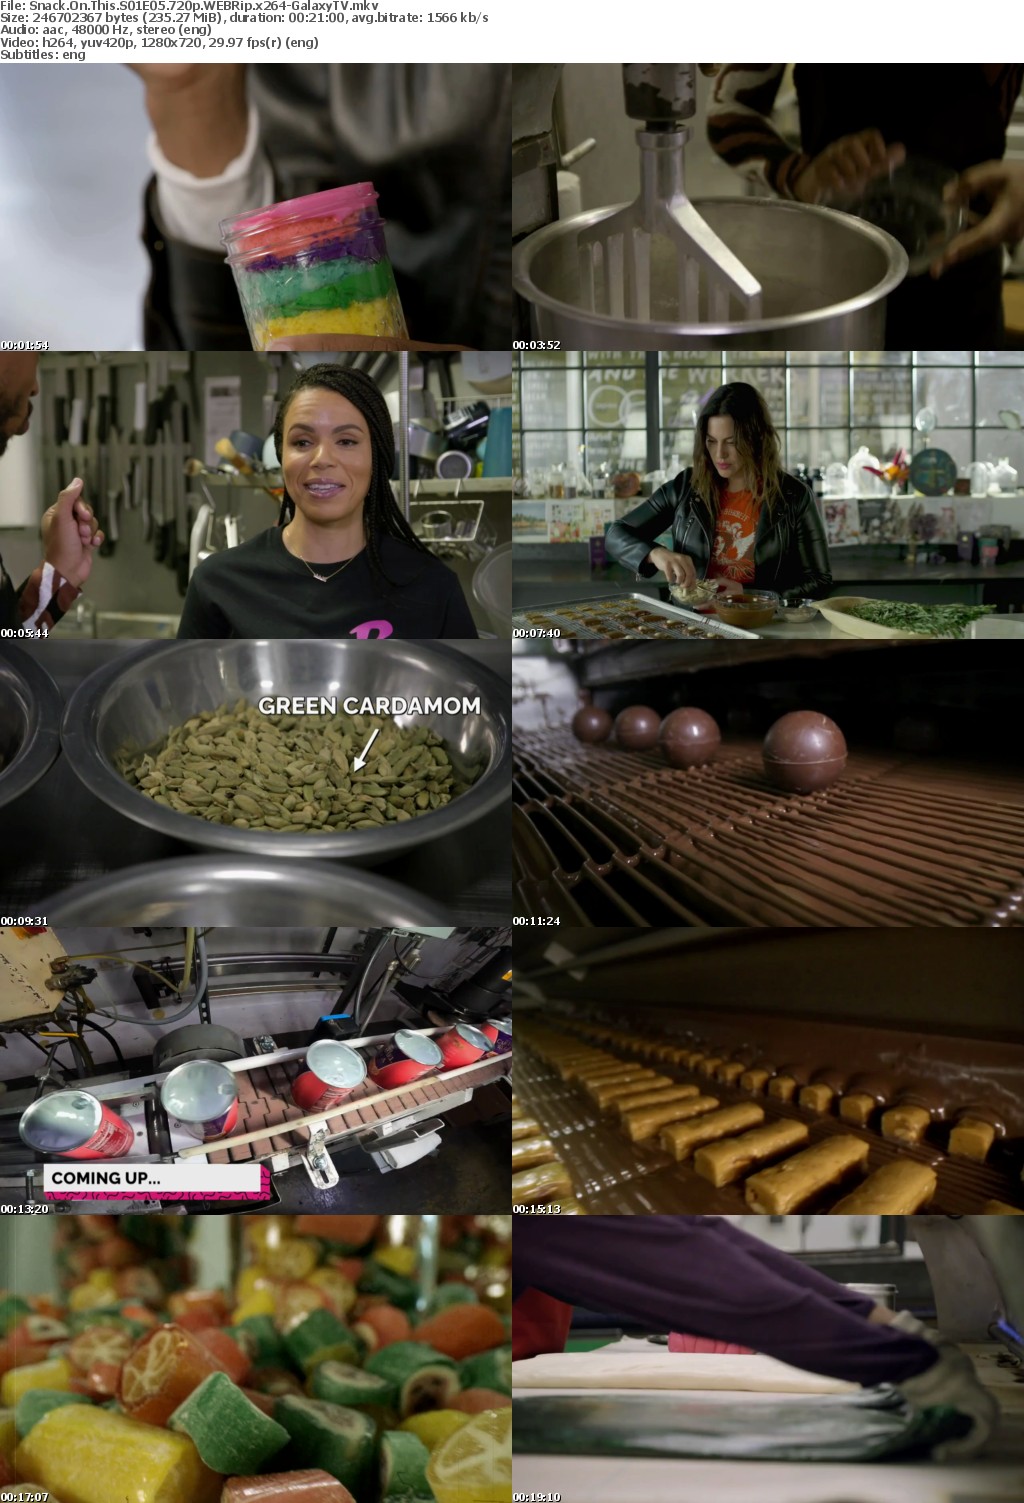 Snack on This S01 COMPLETE 720p WEBRip x264-GalaxyTV